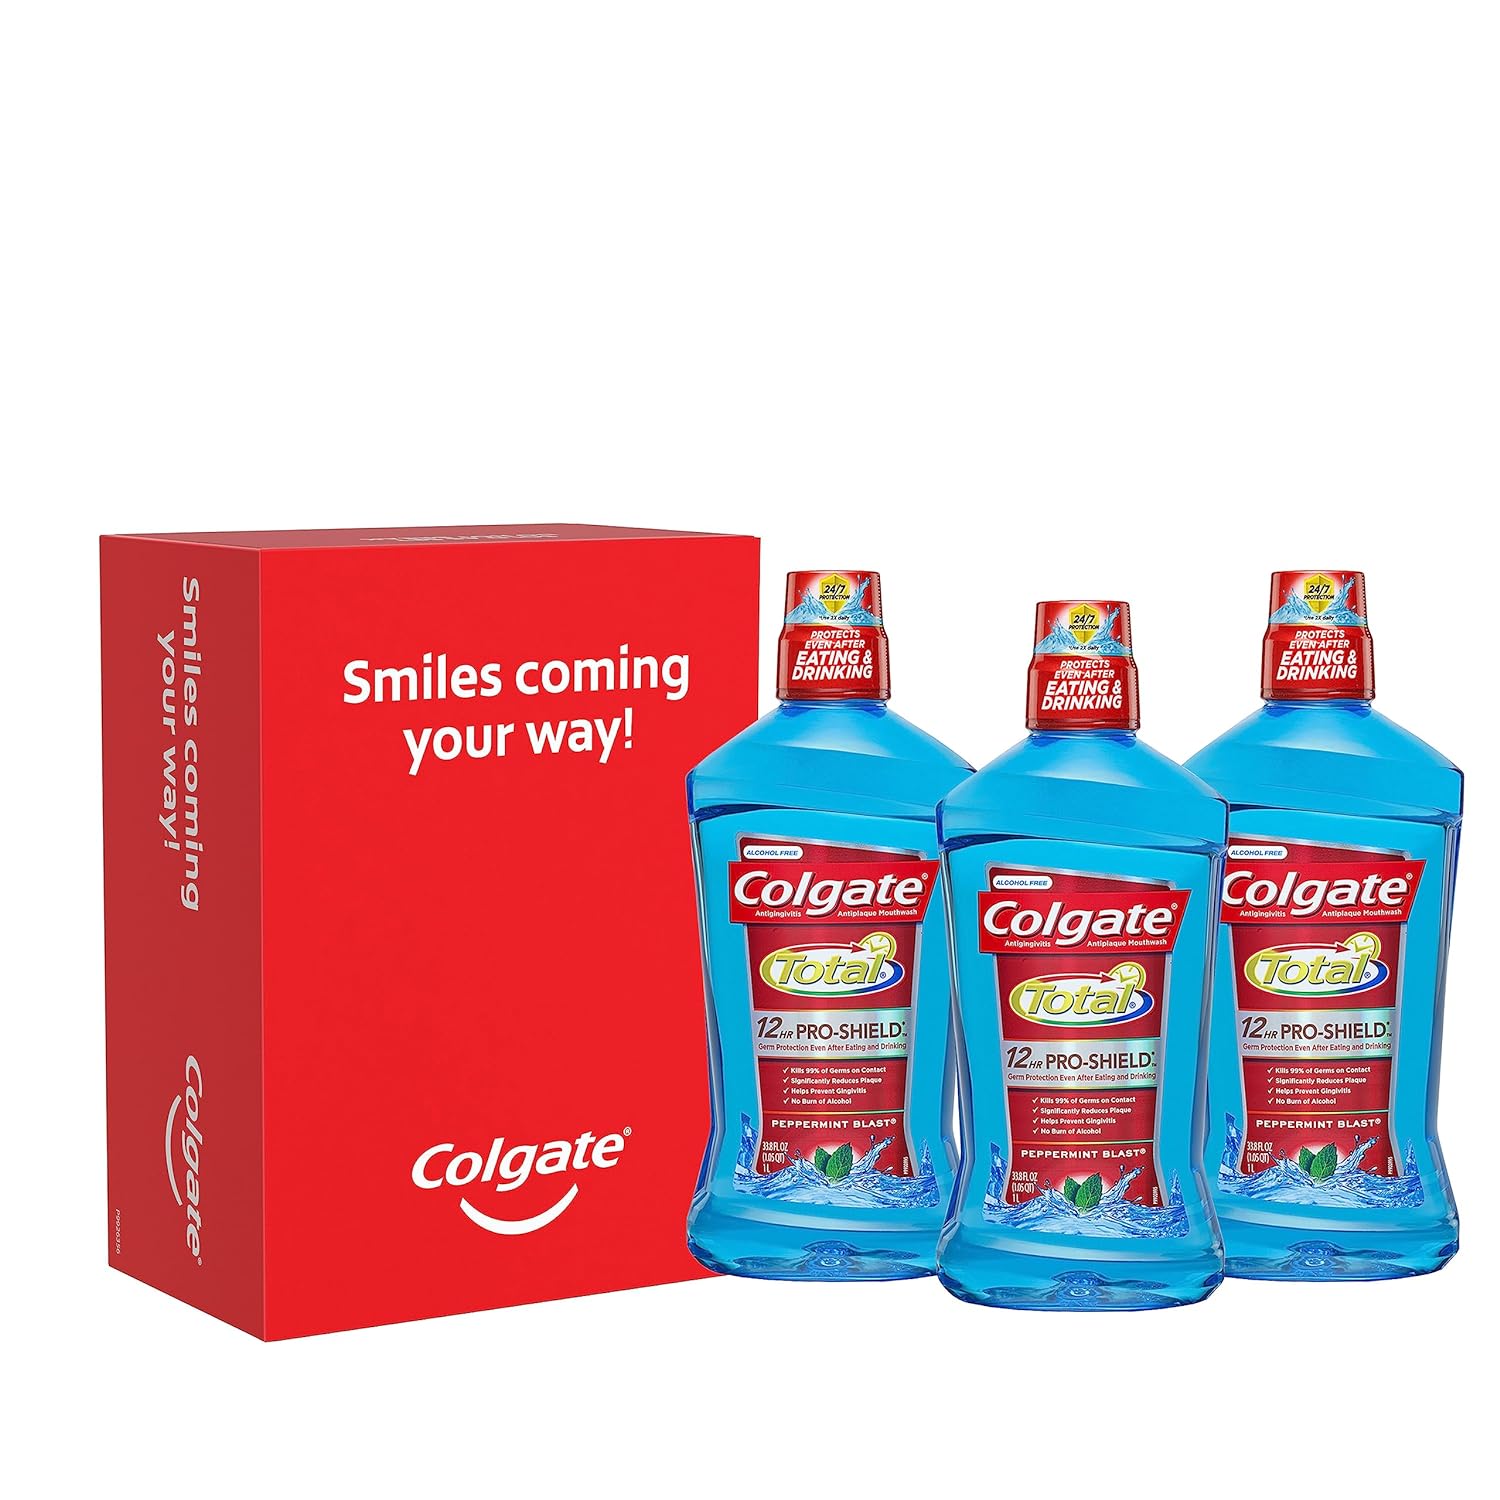 Colgate Total Mouthwash, Alcohol Free Mouthwash, Peppermint, 33.8 Ounce, (Pack of 3)